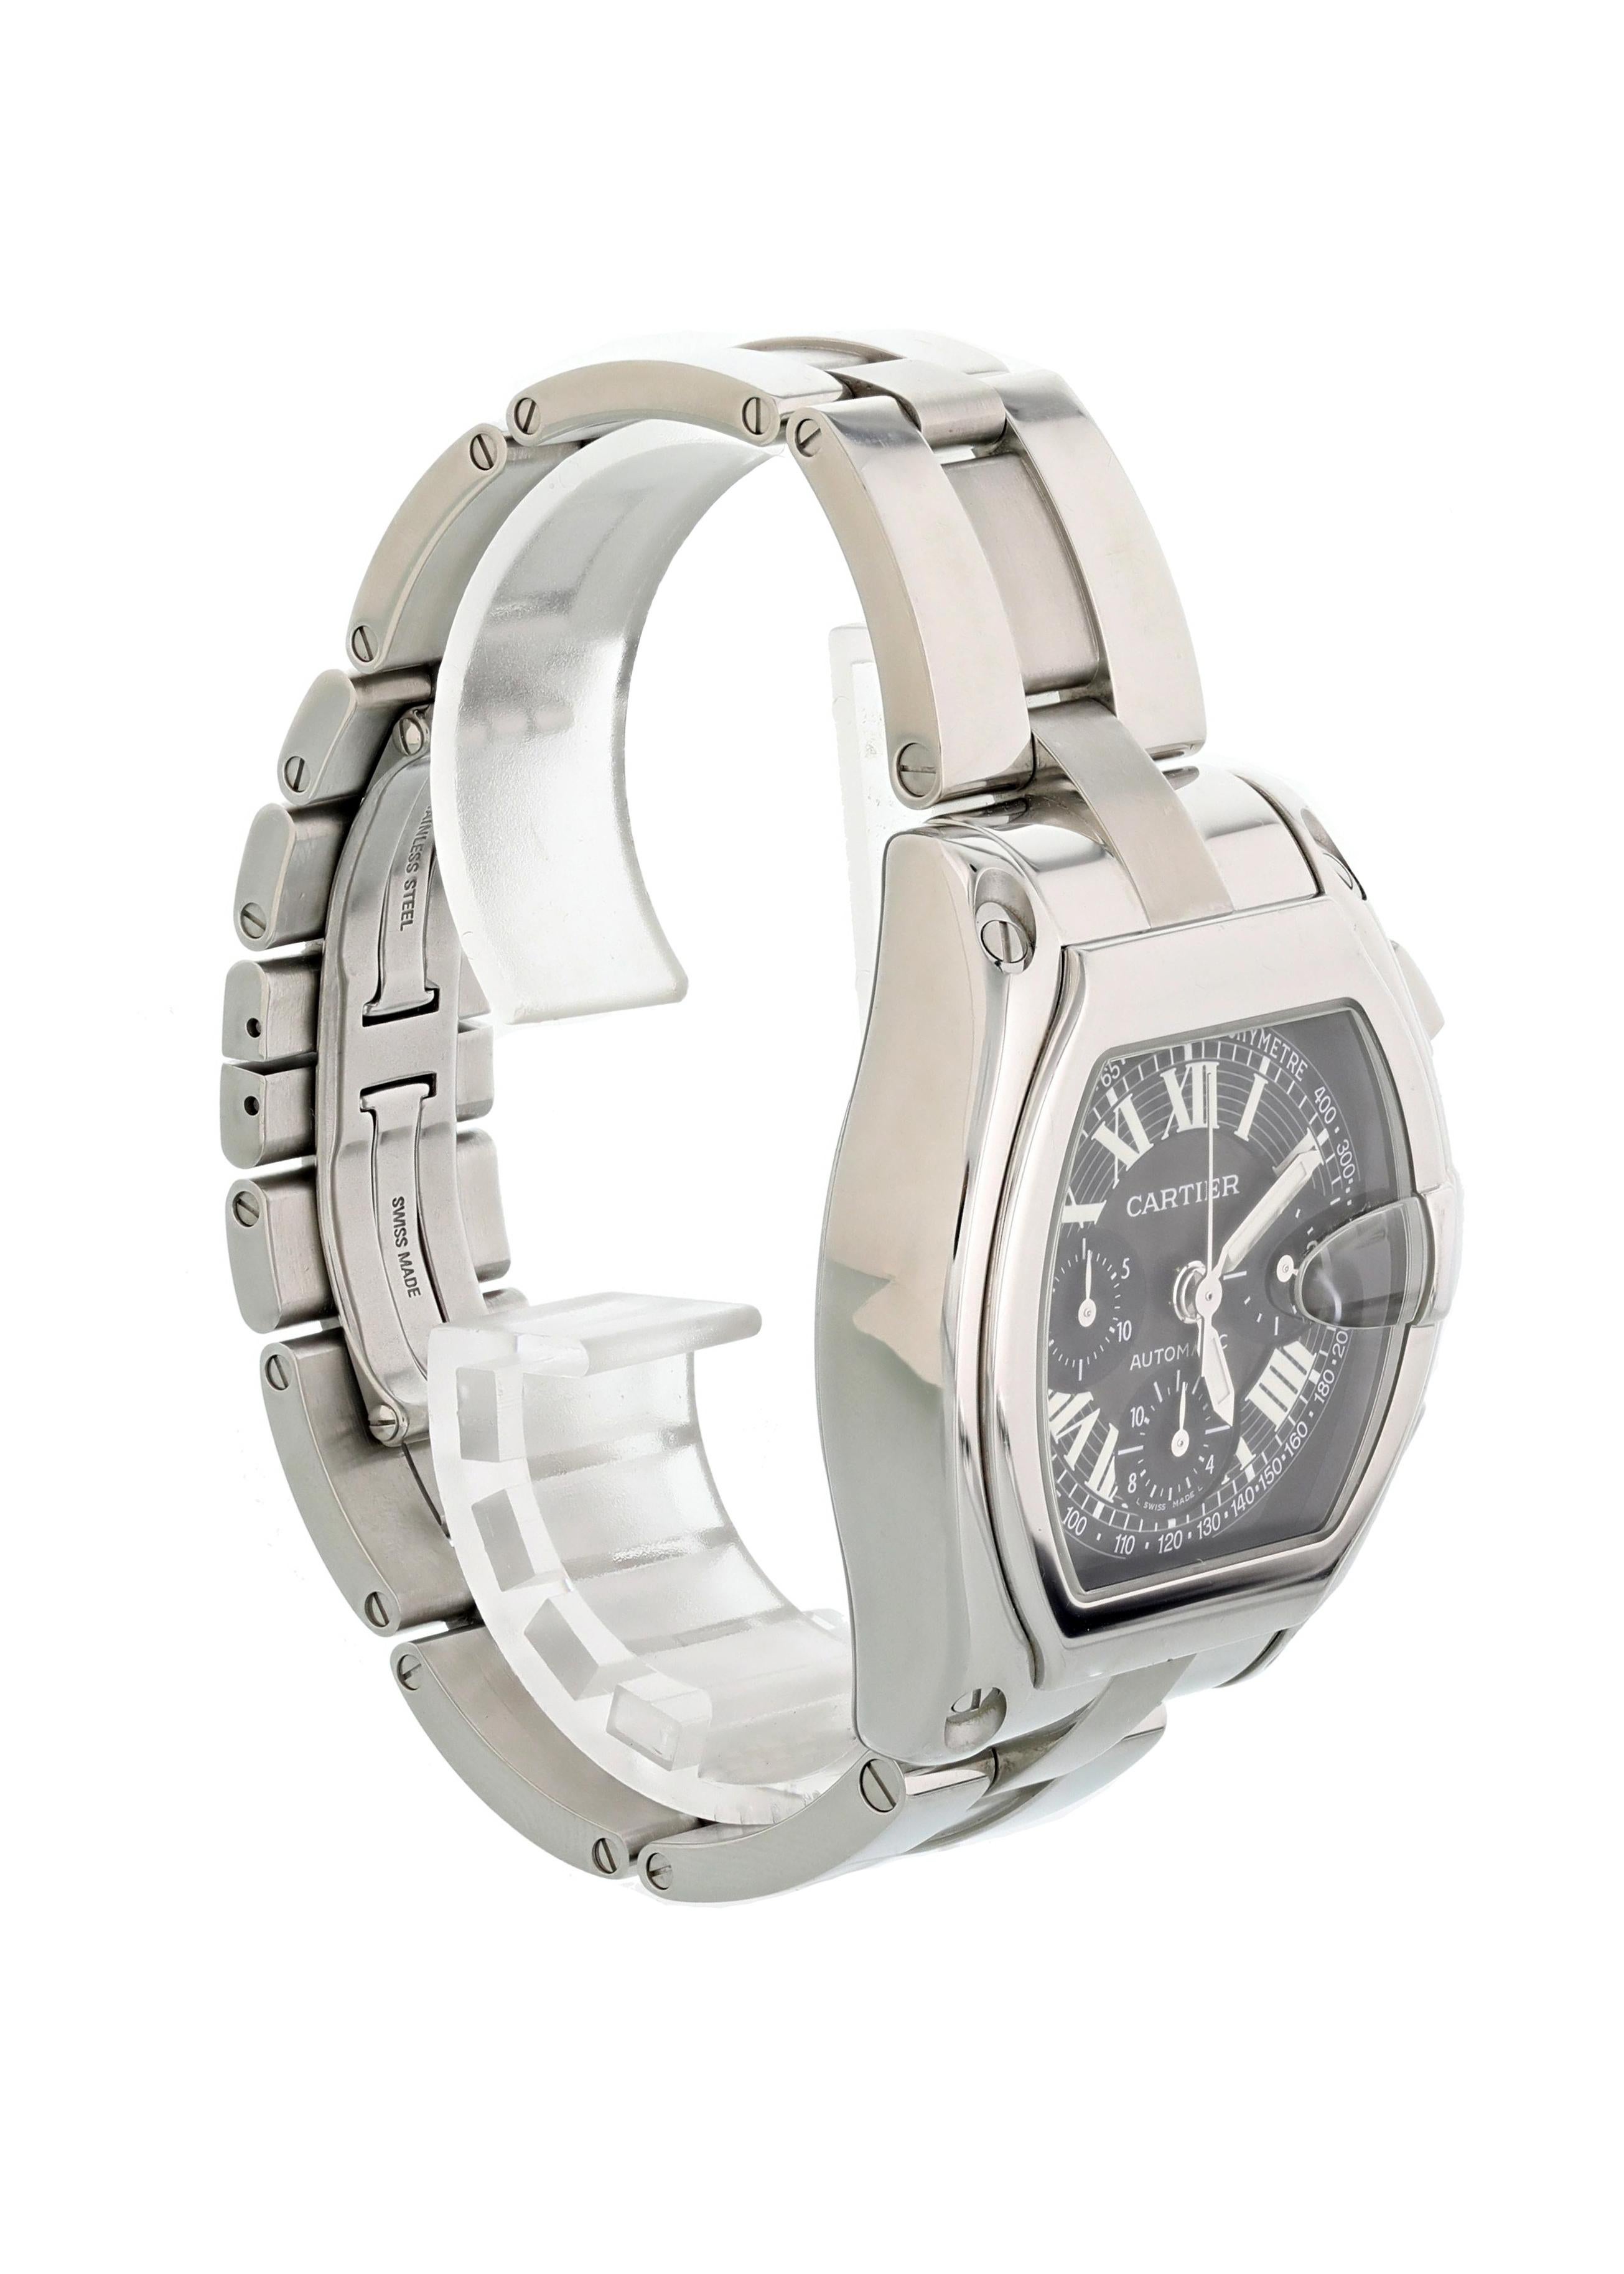 Cartier Roadster XL Chronograph 2618 Men's Watch In Excellent Condition For Sale In New York, NY